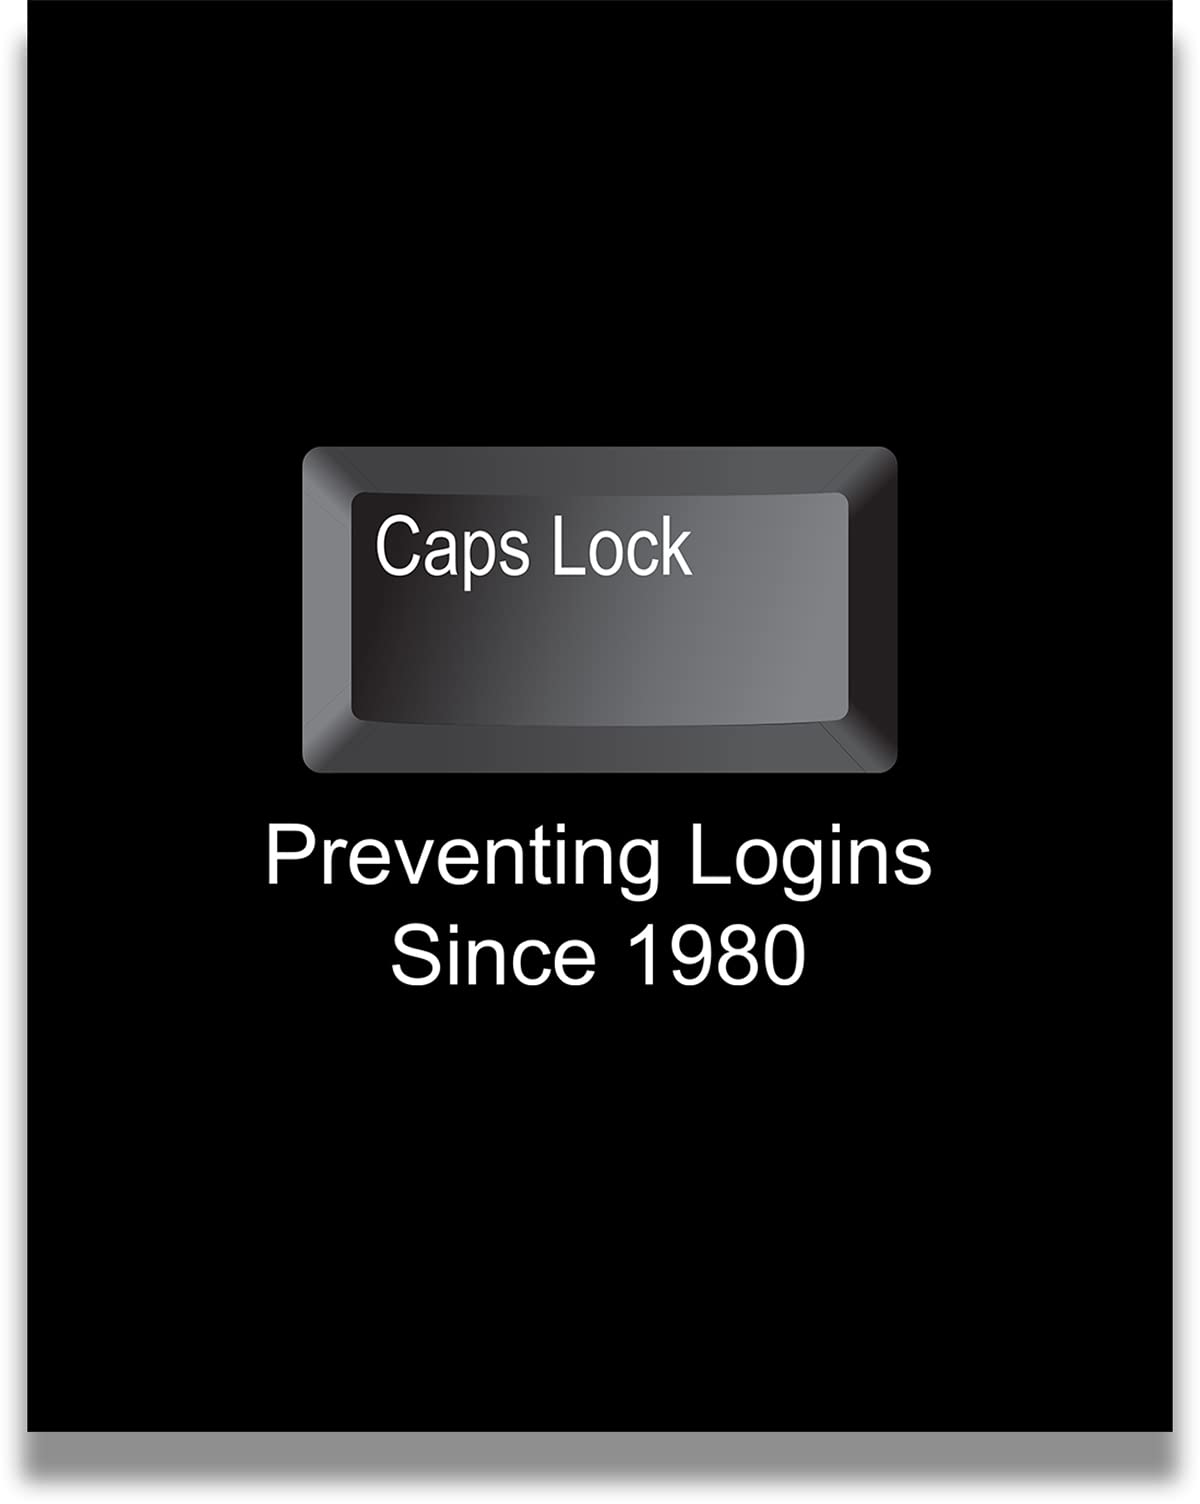 Preventing Logins Since 1980 Wall Decor Art Print on Black Background - computer programmer print - great gift for coding and computer science enthusiasts